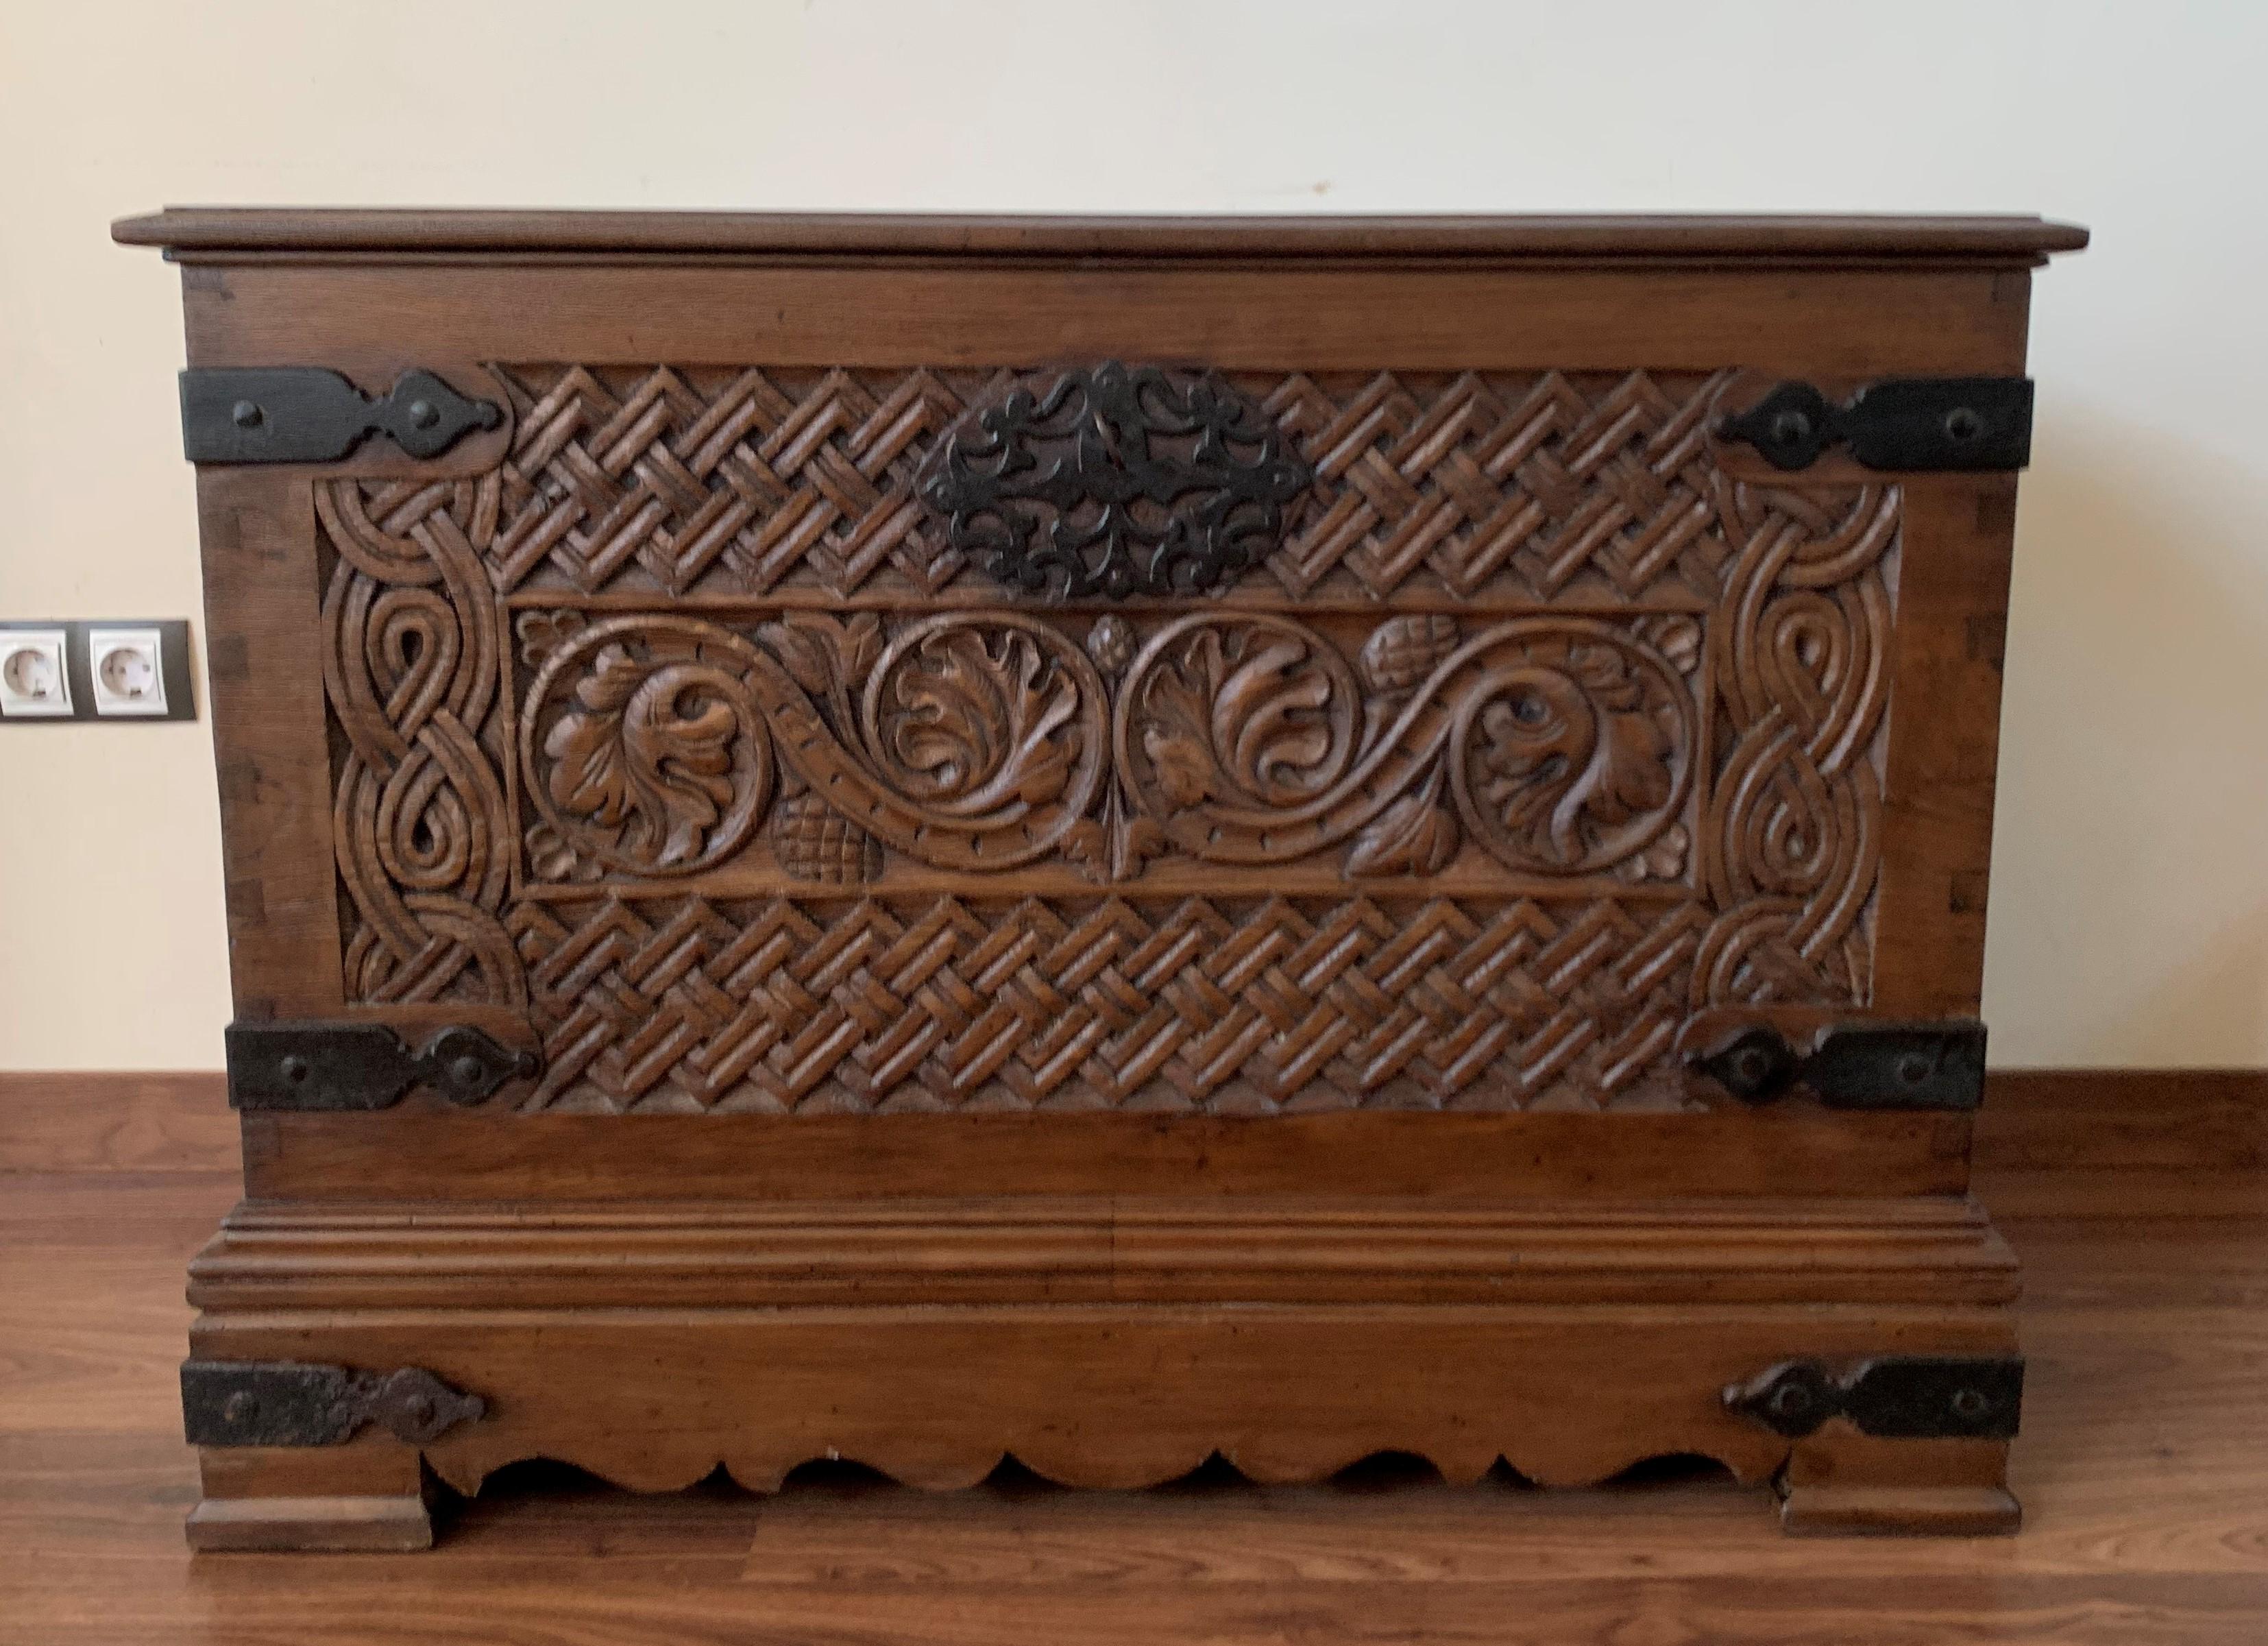 Nice 17th century chest in brown chestnut. Hand carved facade panel with geometrics decorations. Plinth with brace decorations, dovetail assembly with wrought iron ward ware.
Add a real show stopper to your interior with this extremely large